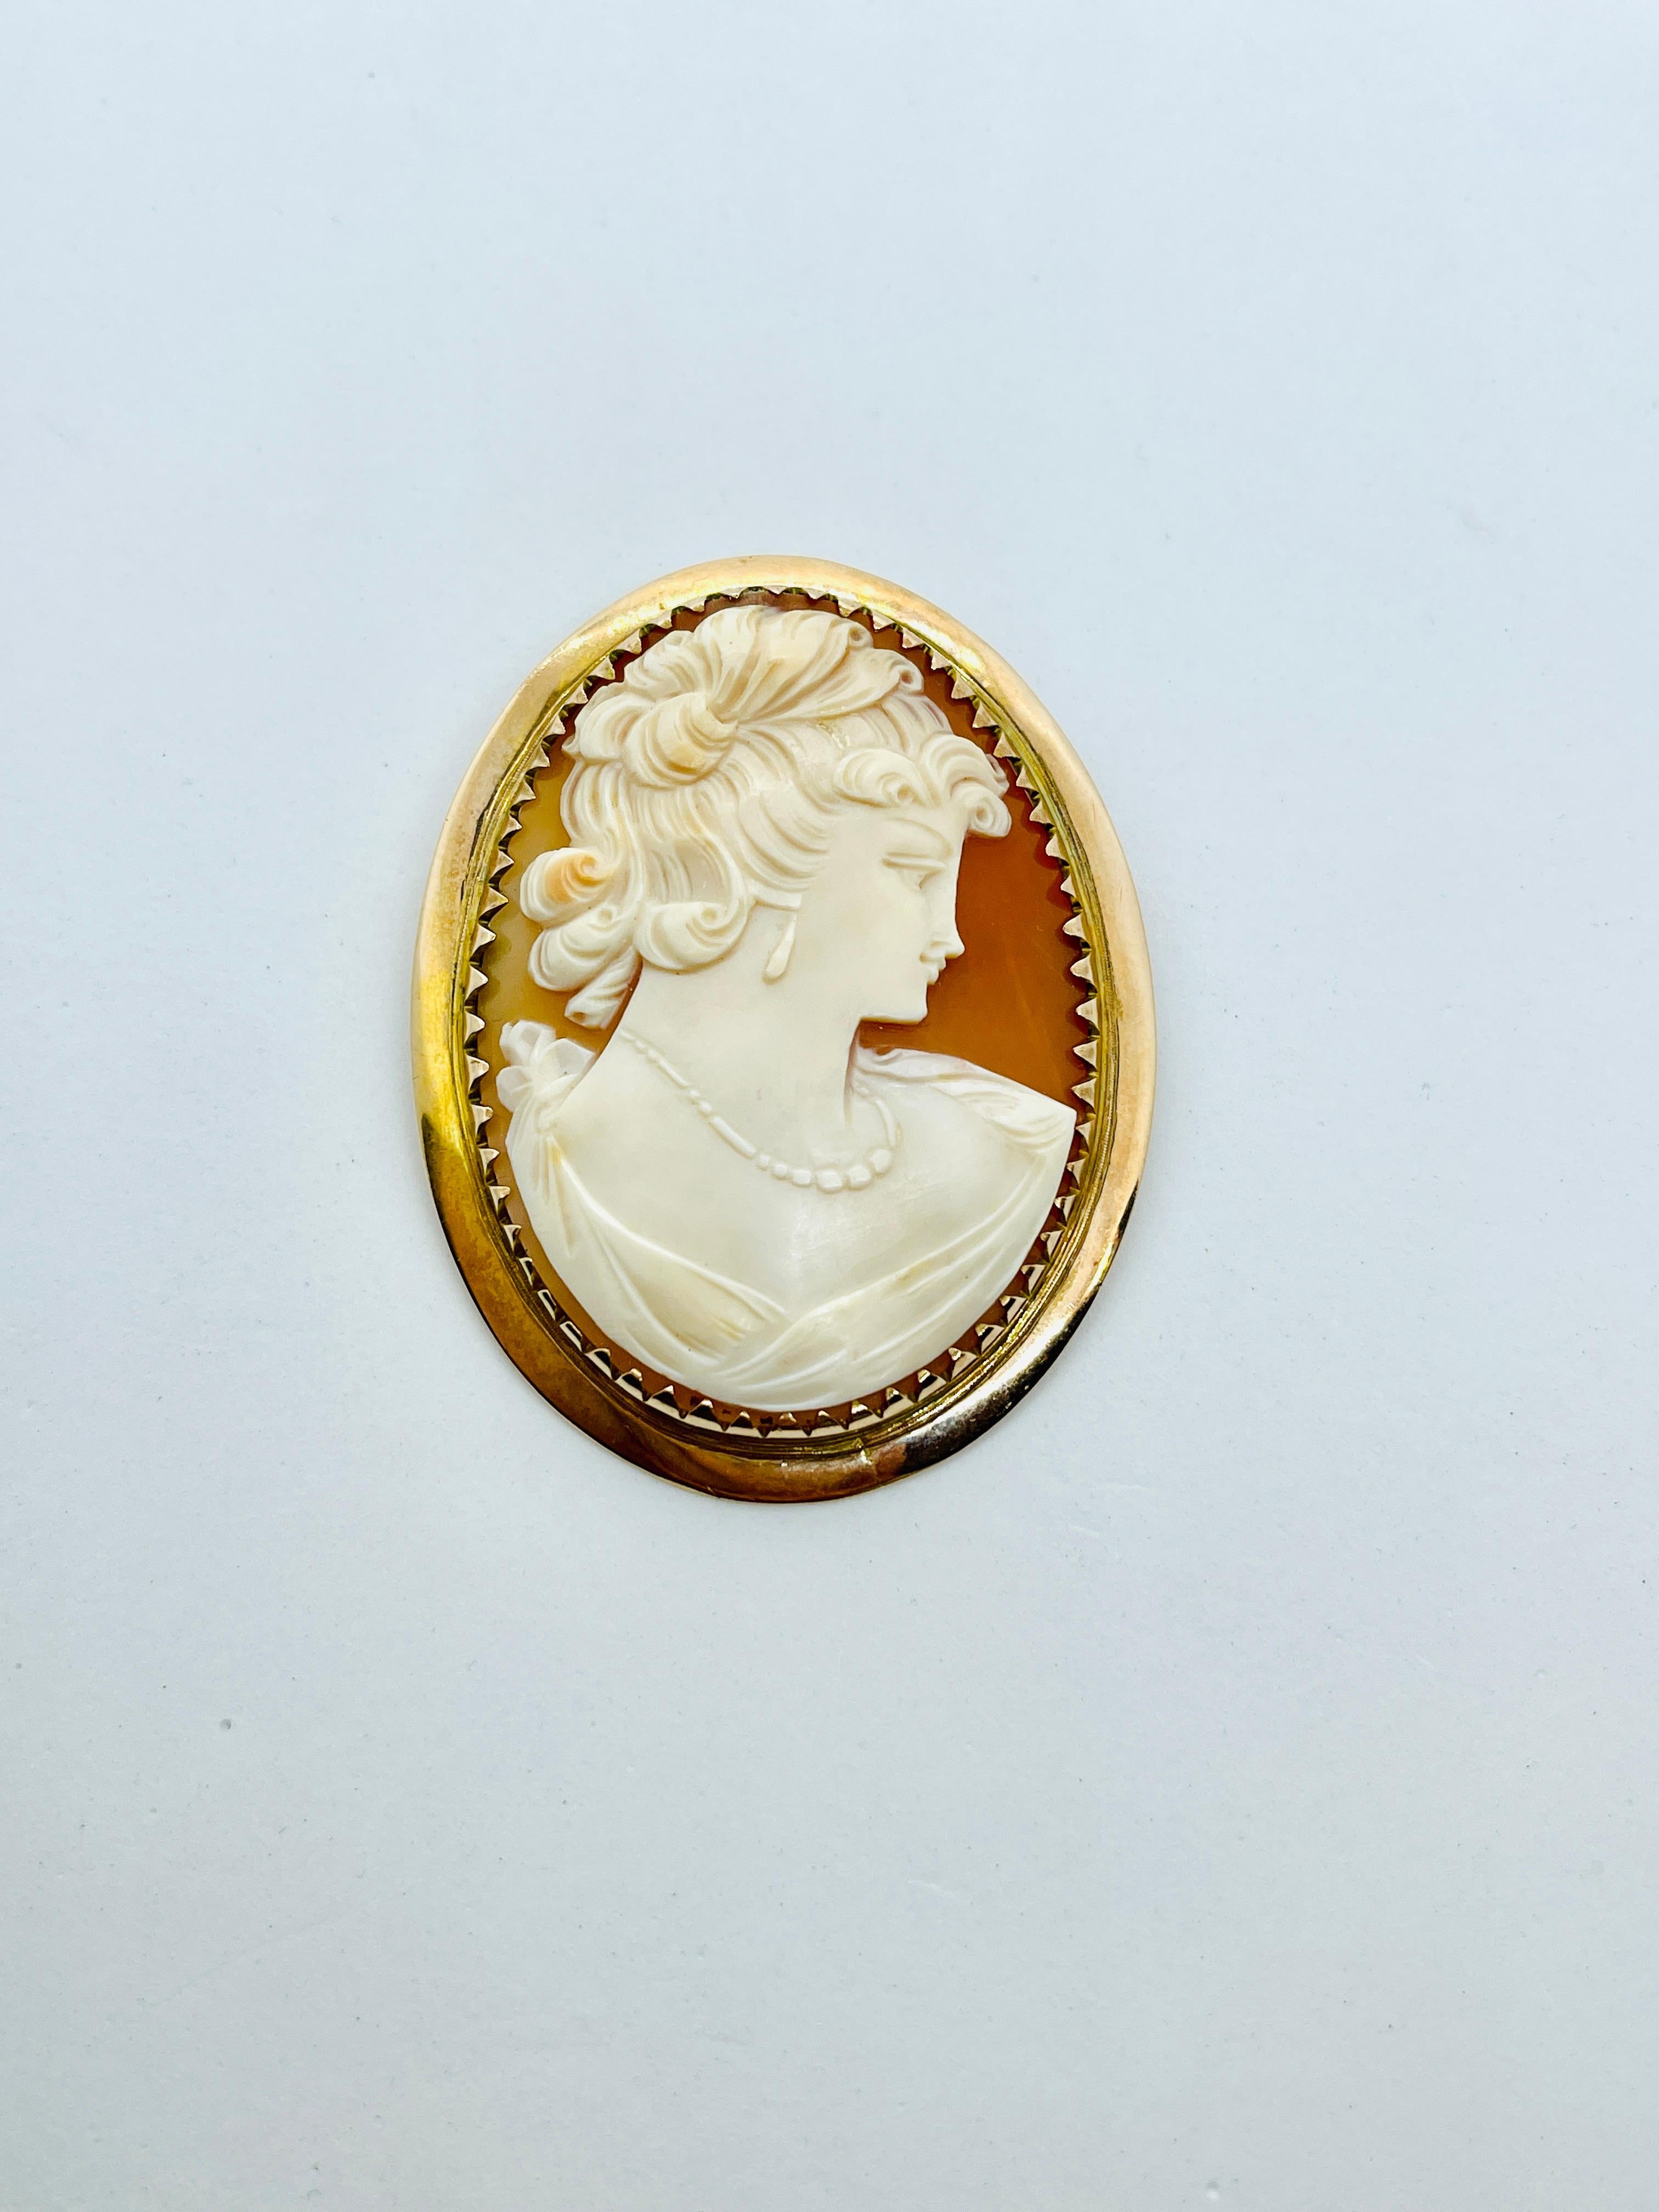 Women's Vintage 9ct Gold Cameo Brooch NeoClassical Lady Wearing Earrings Necklace c1940s For Sale